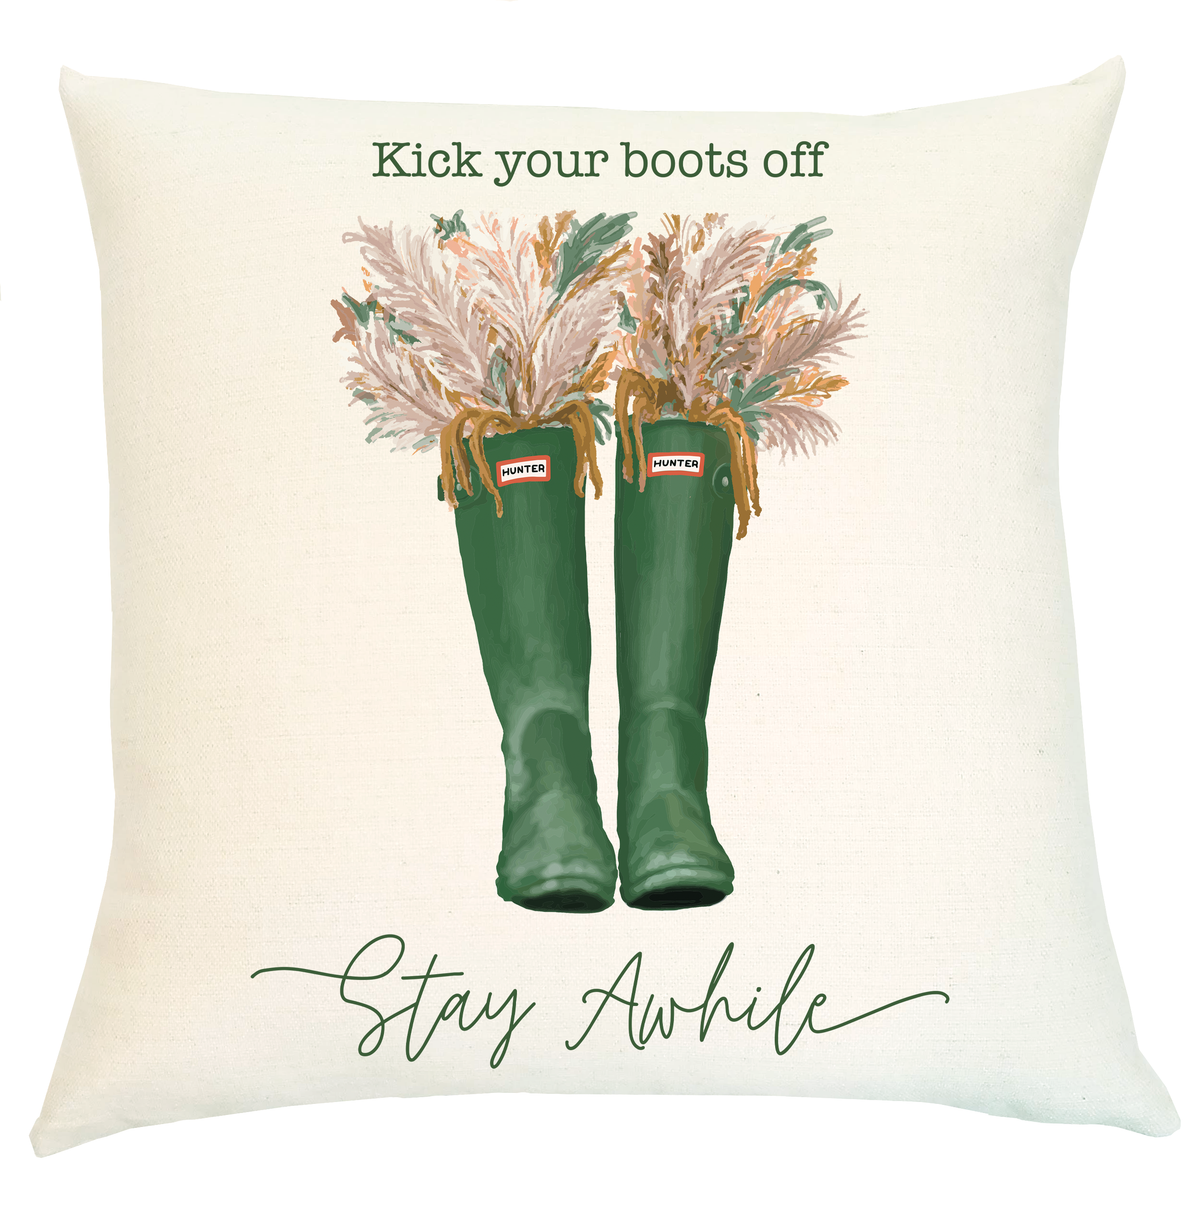 Pillow - Fall - Kick Your Boots Off - Stay Awhile!